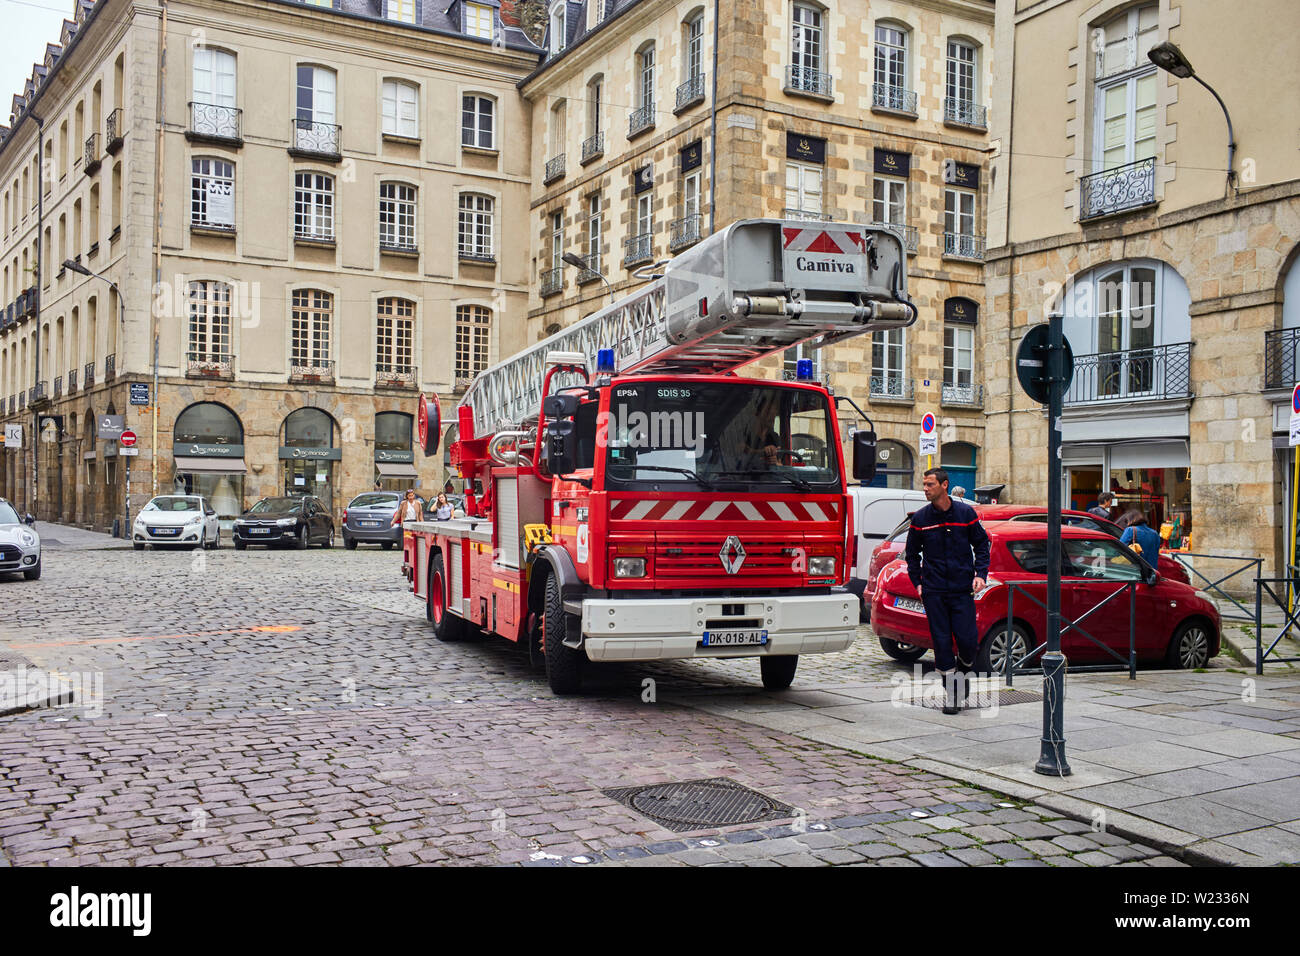 A large turntable fire engine in the narrow streets of Rennes the capital of Britanny, France Stock Photo